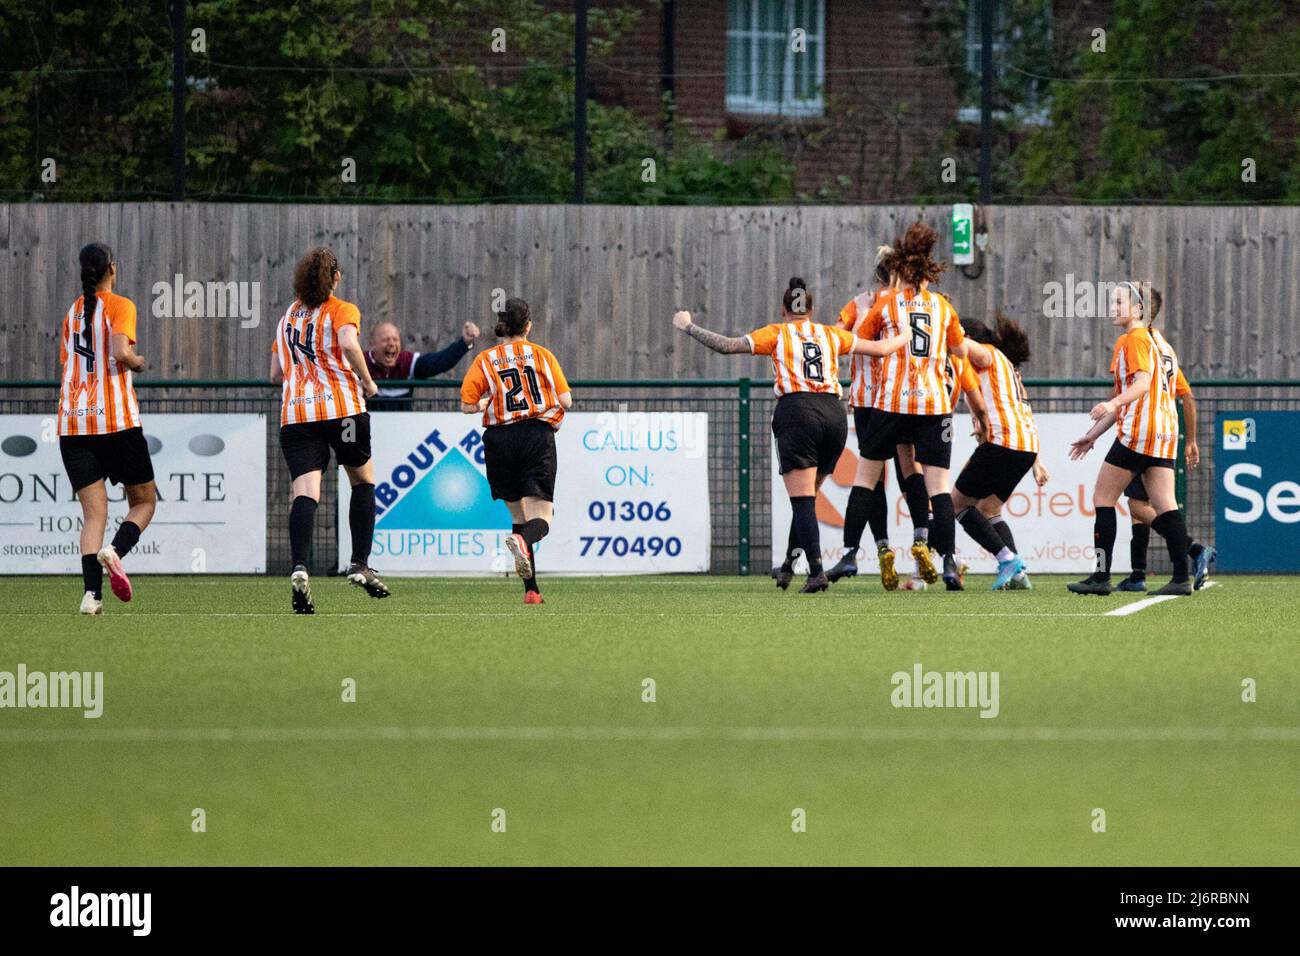 London, England. 03/05/2022, Ashford celebrate their firs goal by Ashley Cheatley (16 Ashford) during the Capital Womens Senior Cup game between Ashford (Middlesex) and Dulwich Hamlet at Meadowbank in London, England.  Liam Asman/SPP Stock Photo